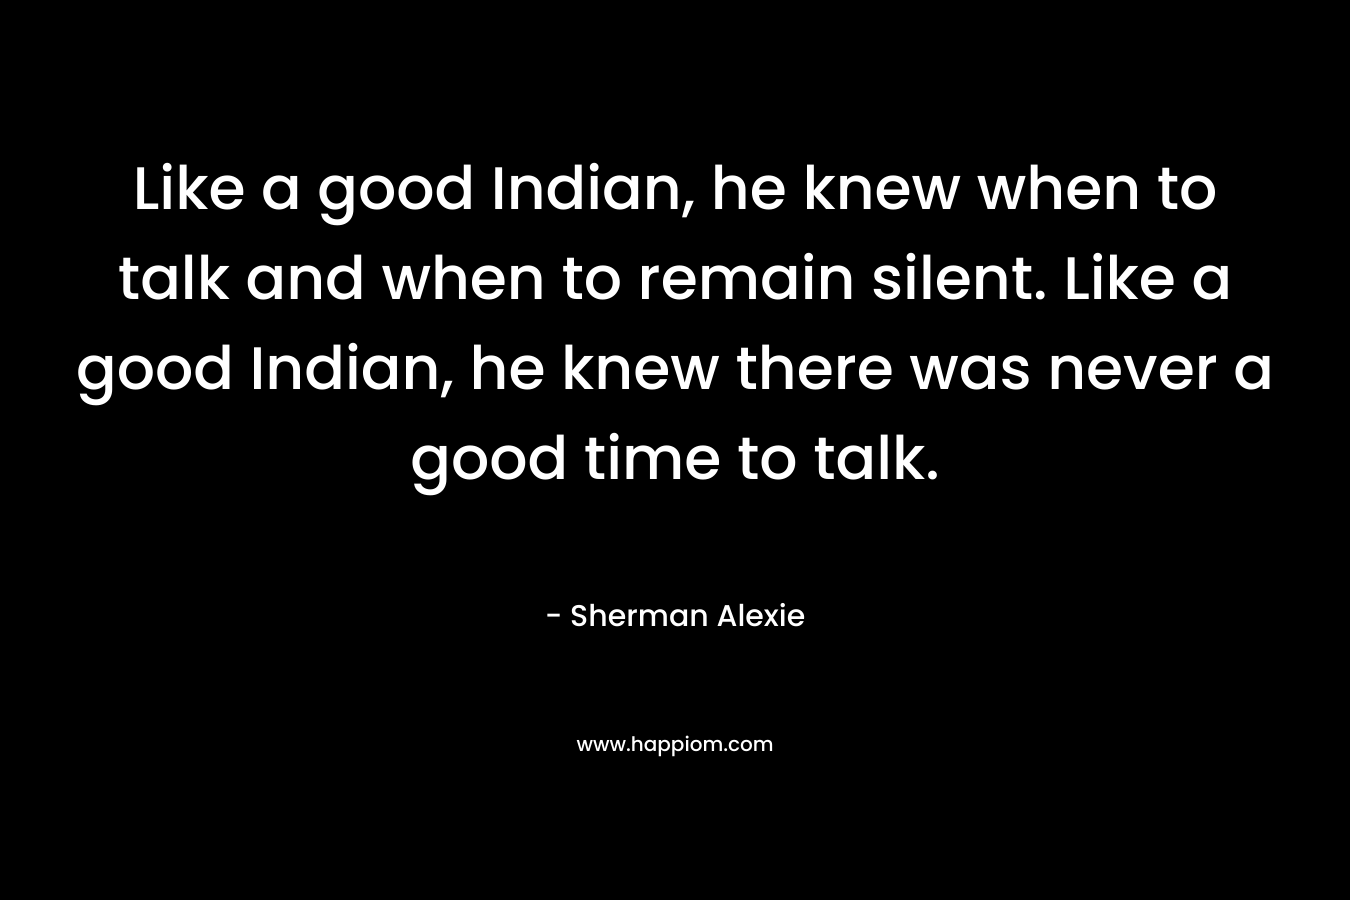 Like a good Indian, he knew when to talk and when to remain silent. Like a good Indian, he knew there was never a good time to talk.